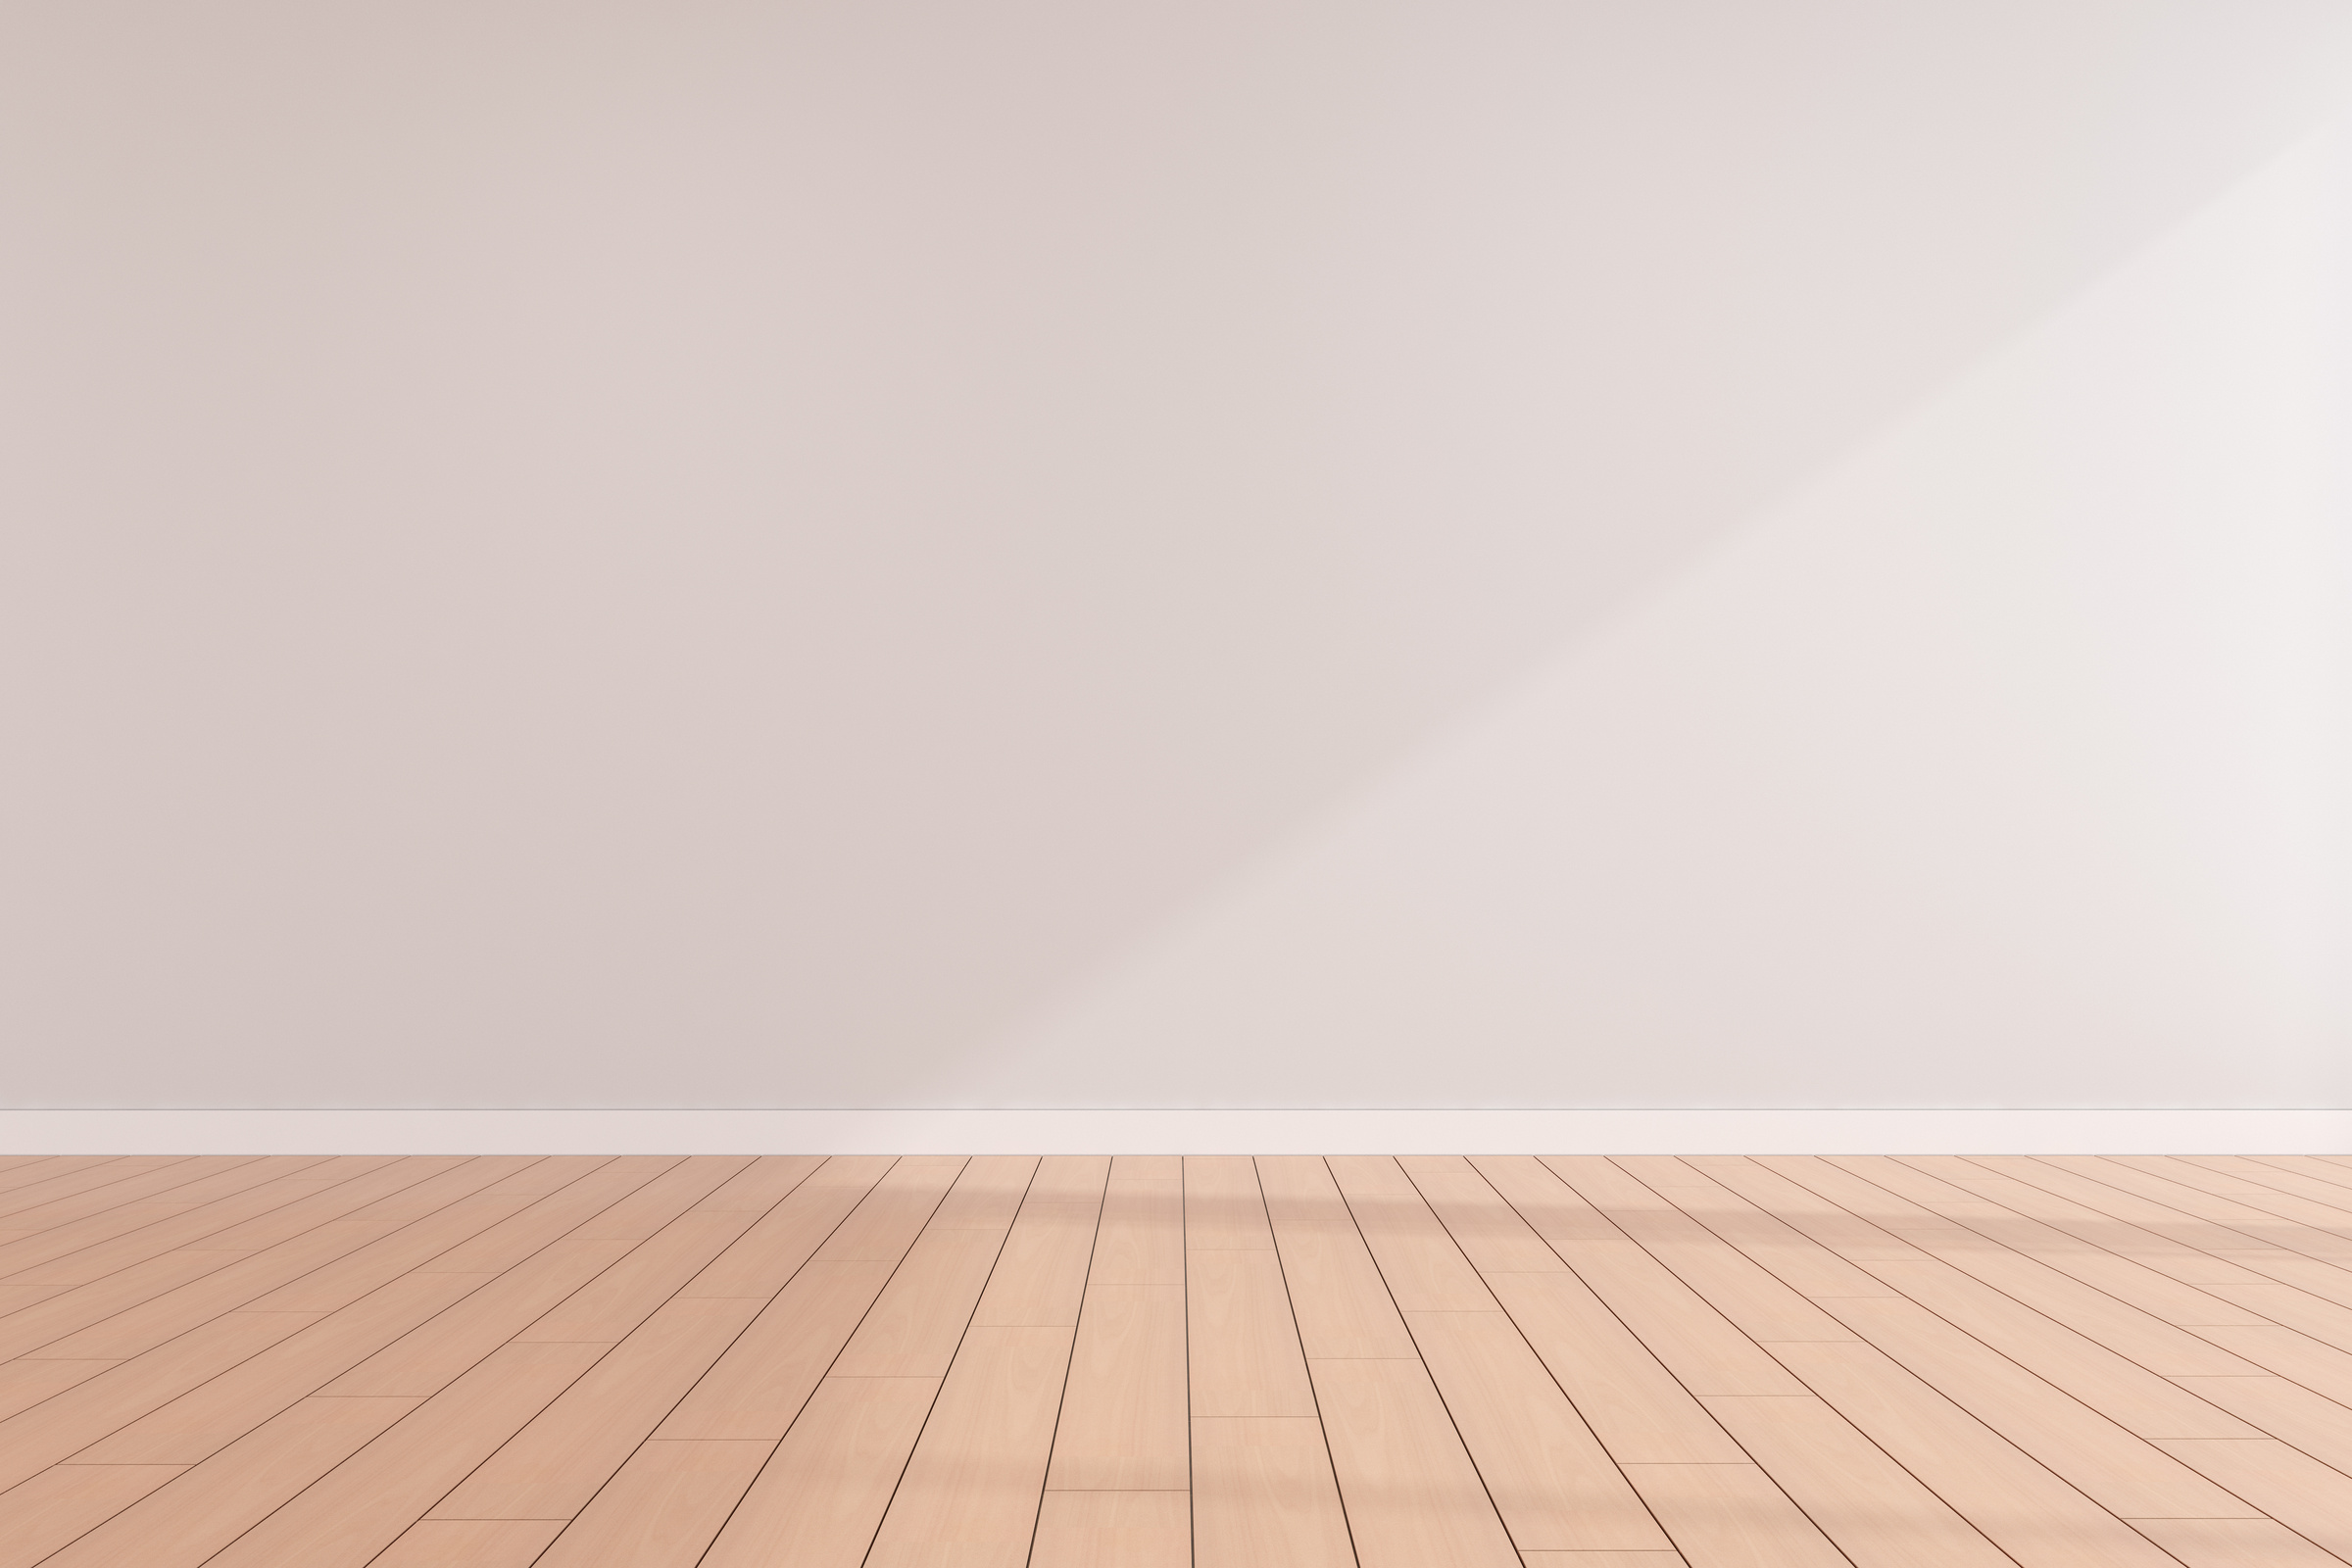 3D Rendering of Empty Room with Shadow on Wall